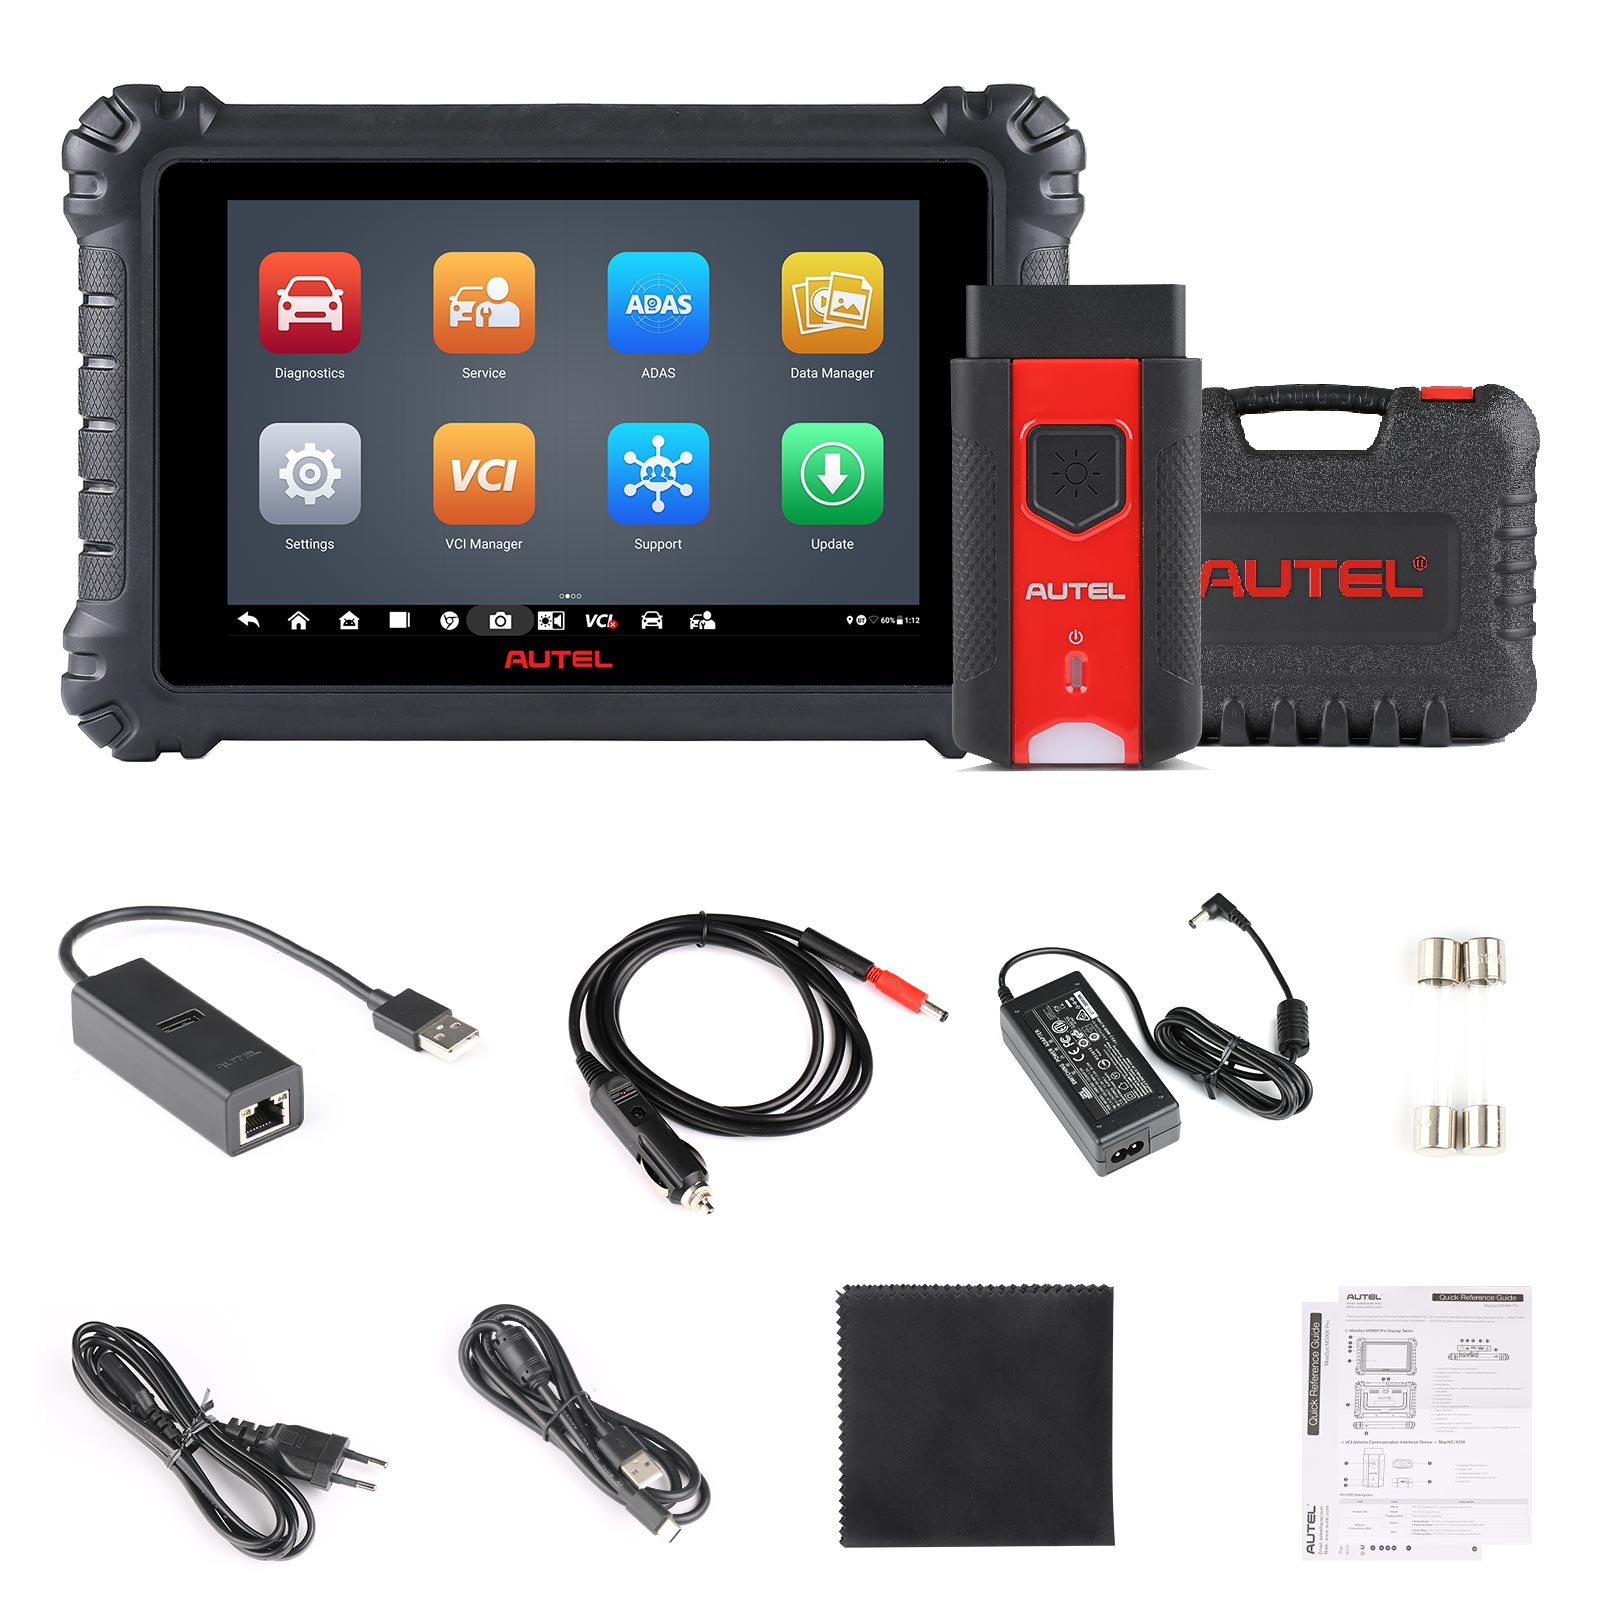 Autel MaxiSys MS906S Pro PACKAGE LIST